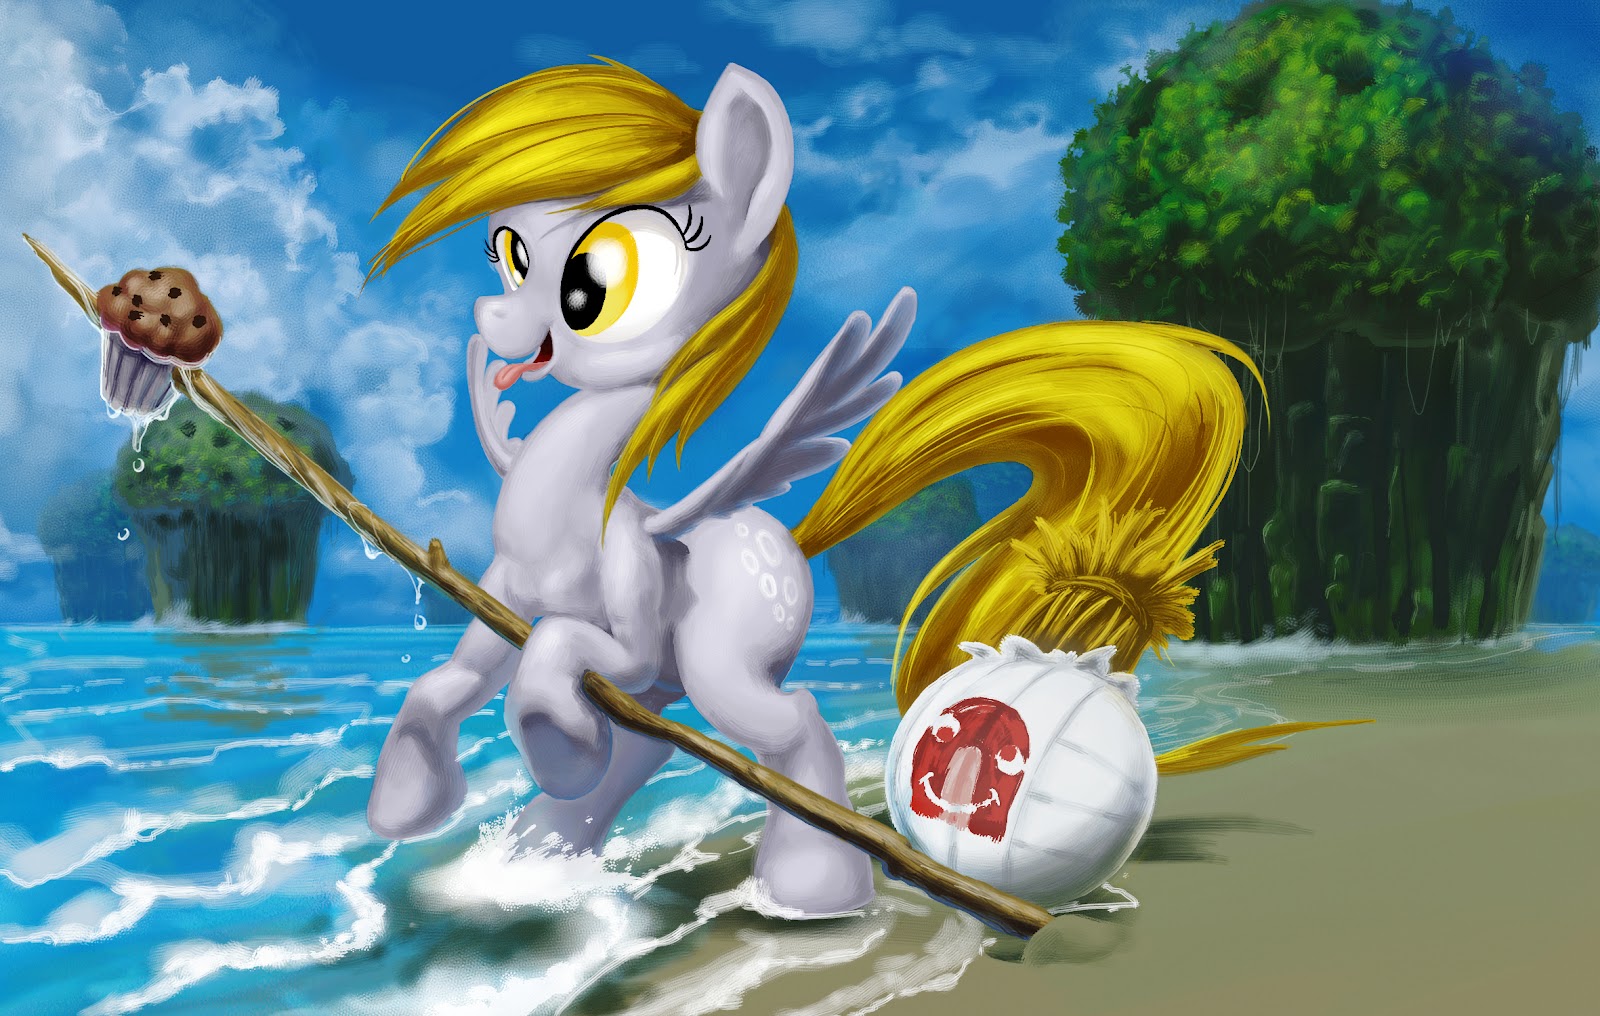 Vos meilleures images de Derpy - Page 4 169656+-+castaway+crossover+derpy_hooves+muffin